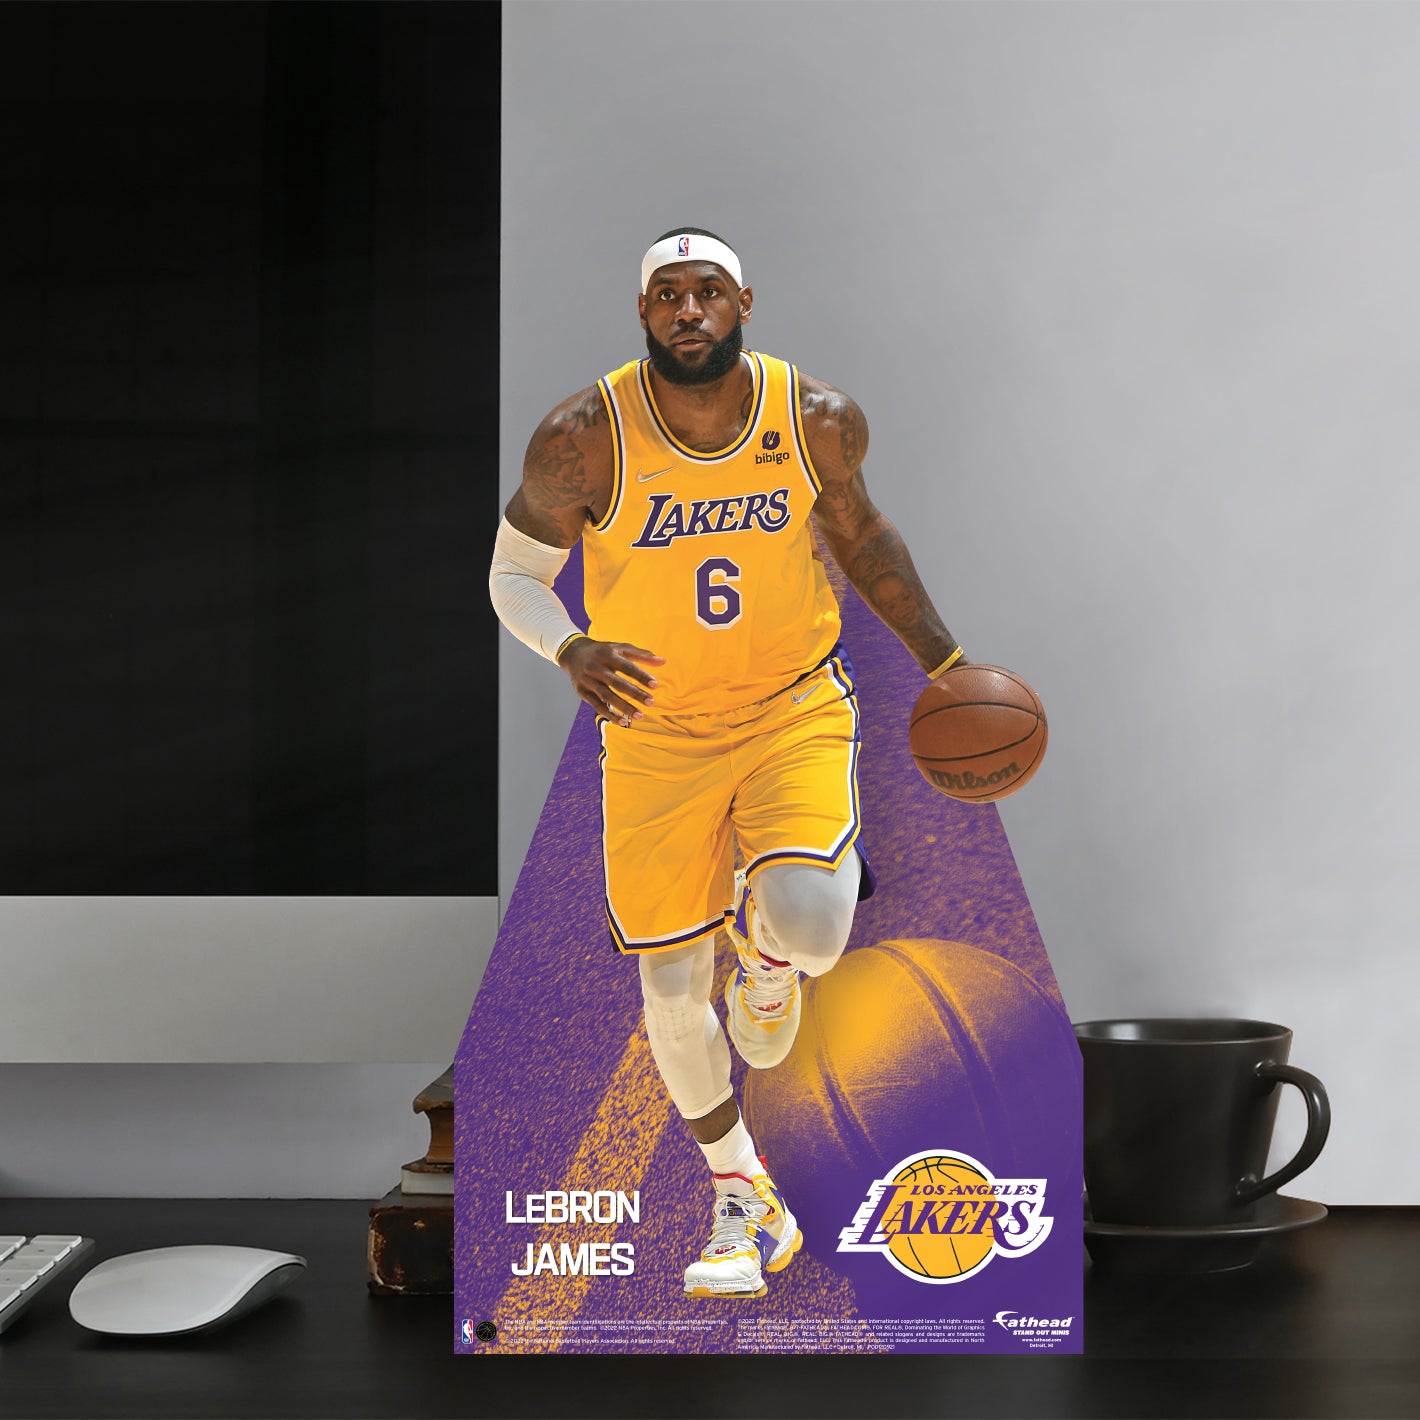 Los Angeles Lakers Lebron James Jersey Officially Licensed NBA